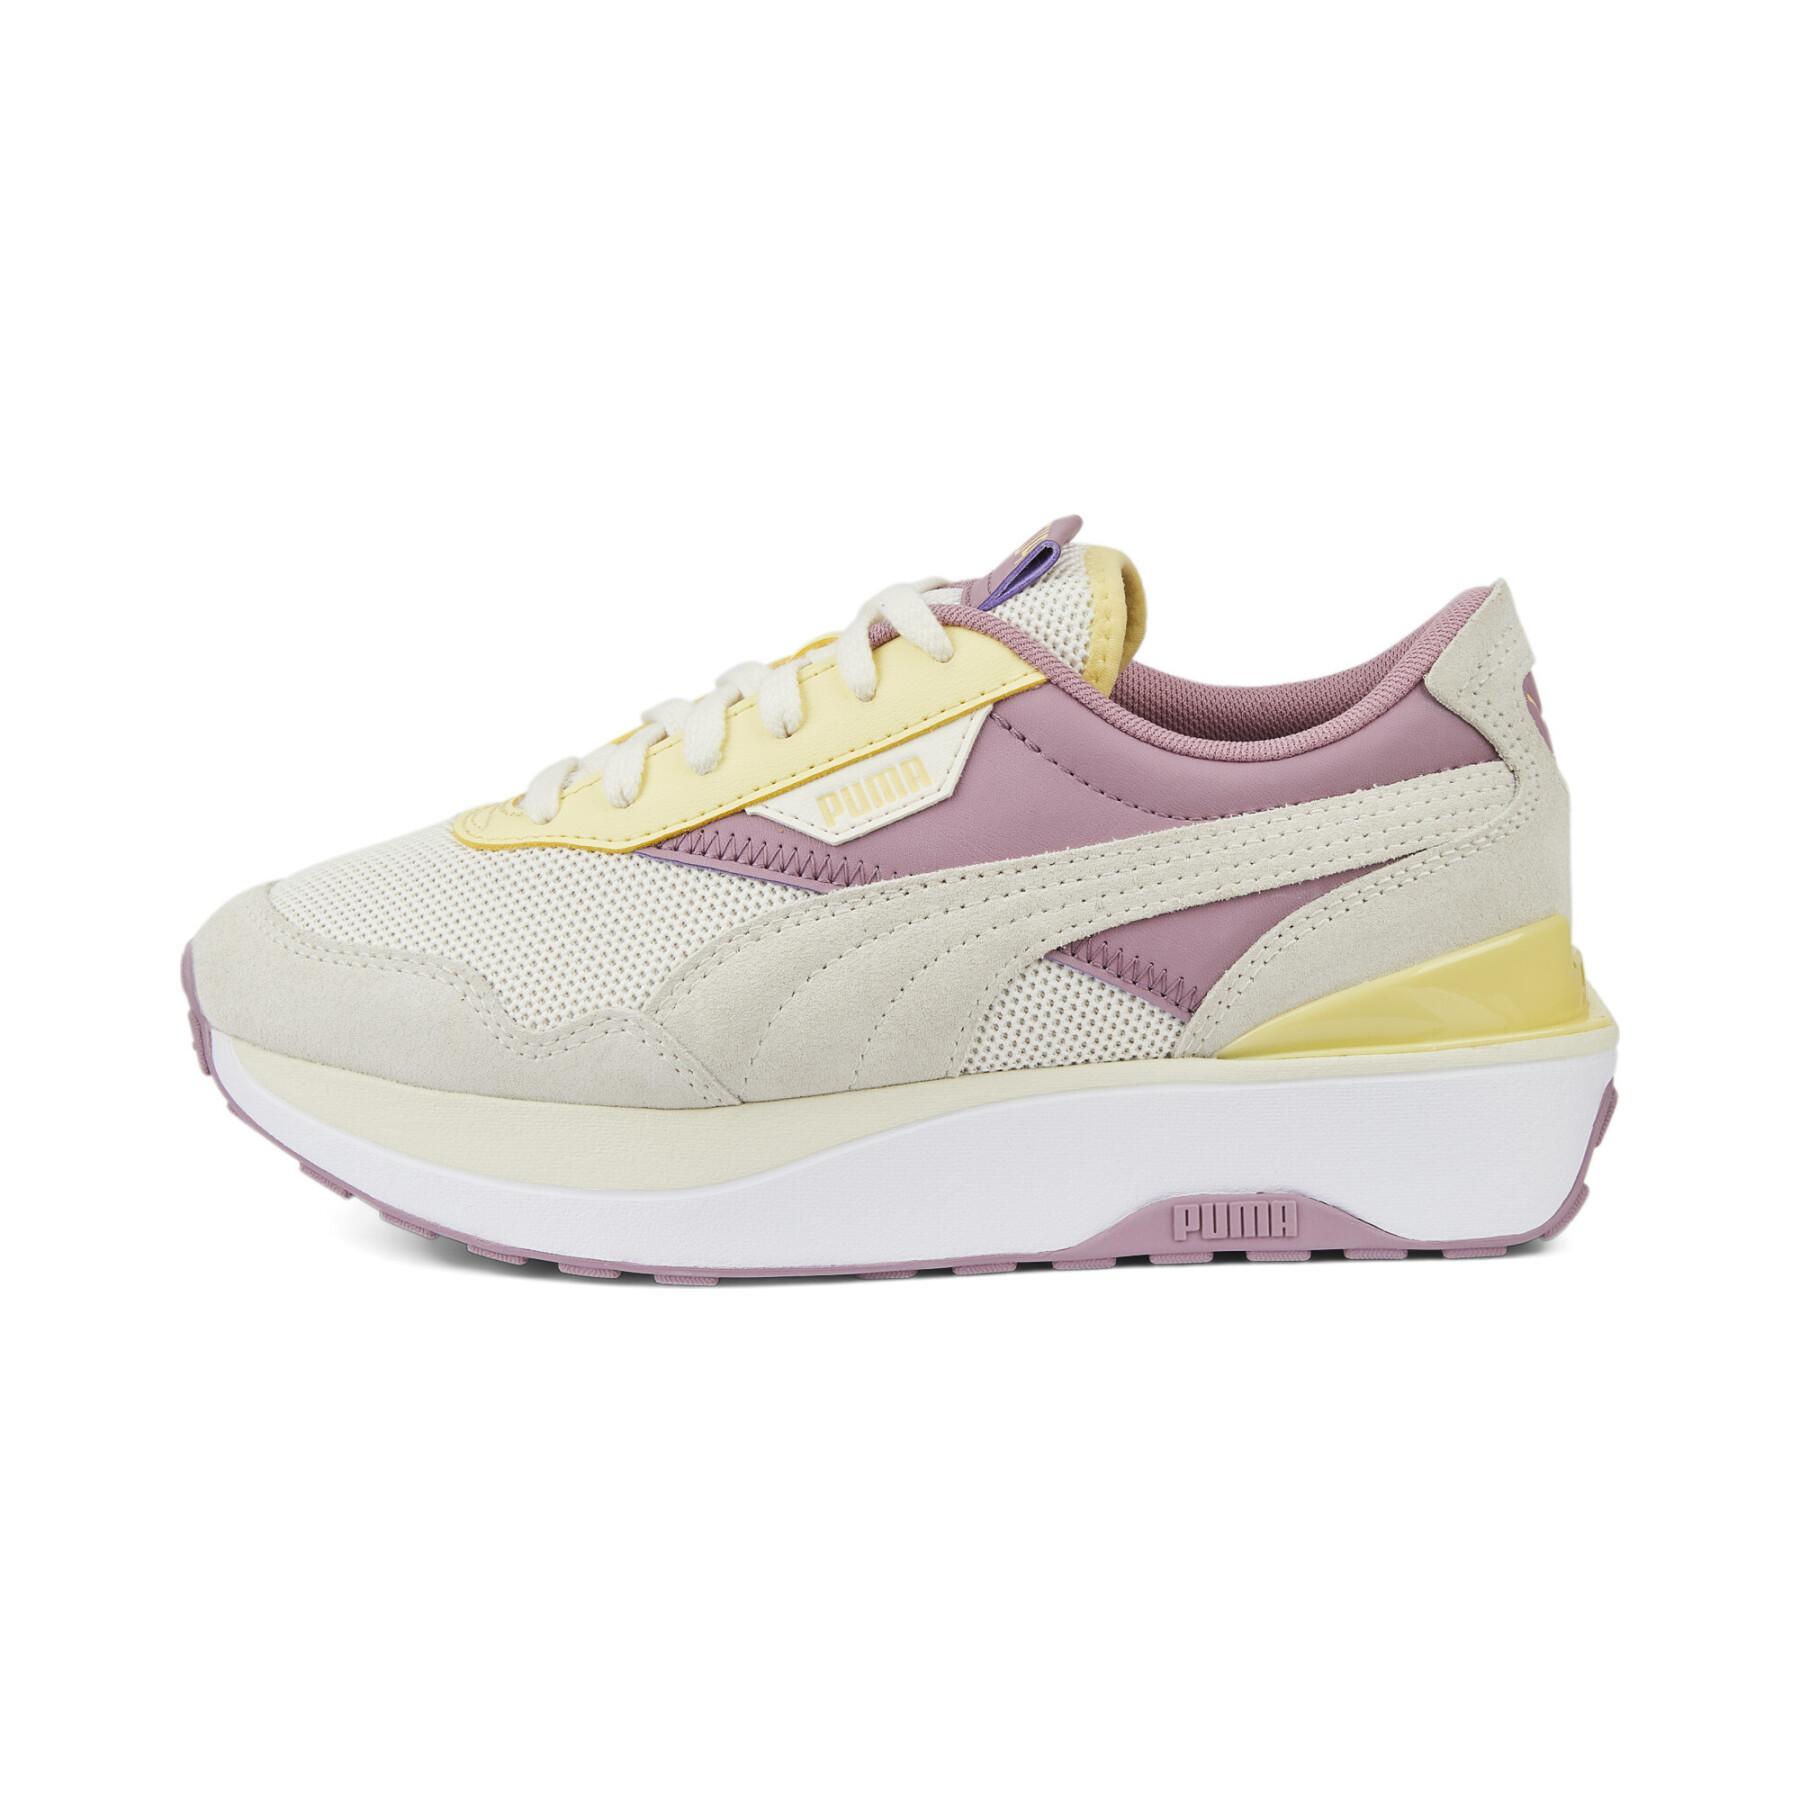 Women's sneakers Puma Cruise Rider Candy